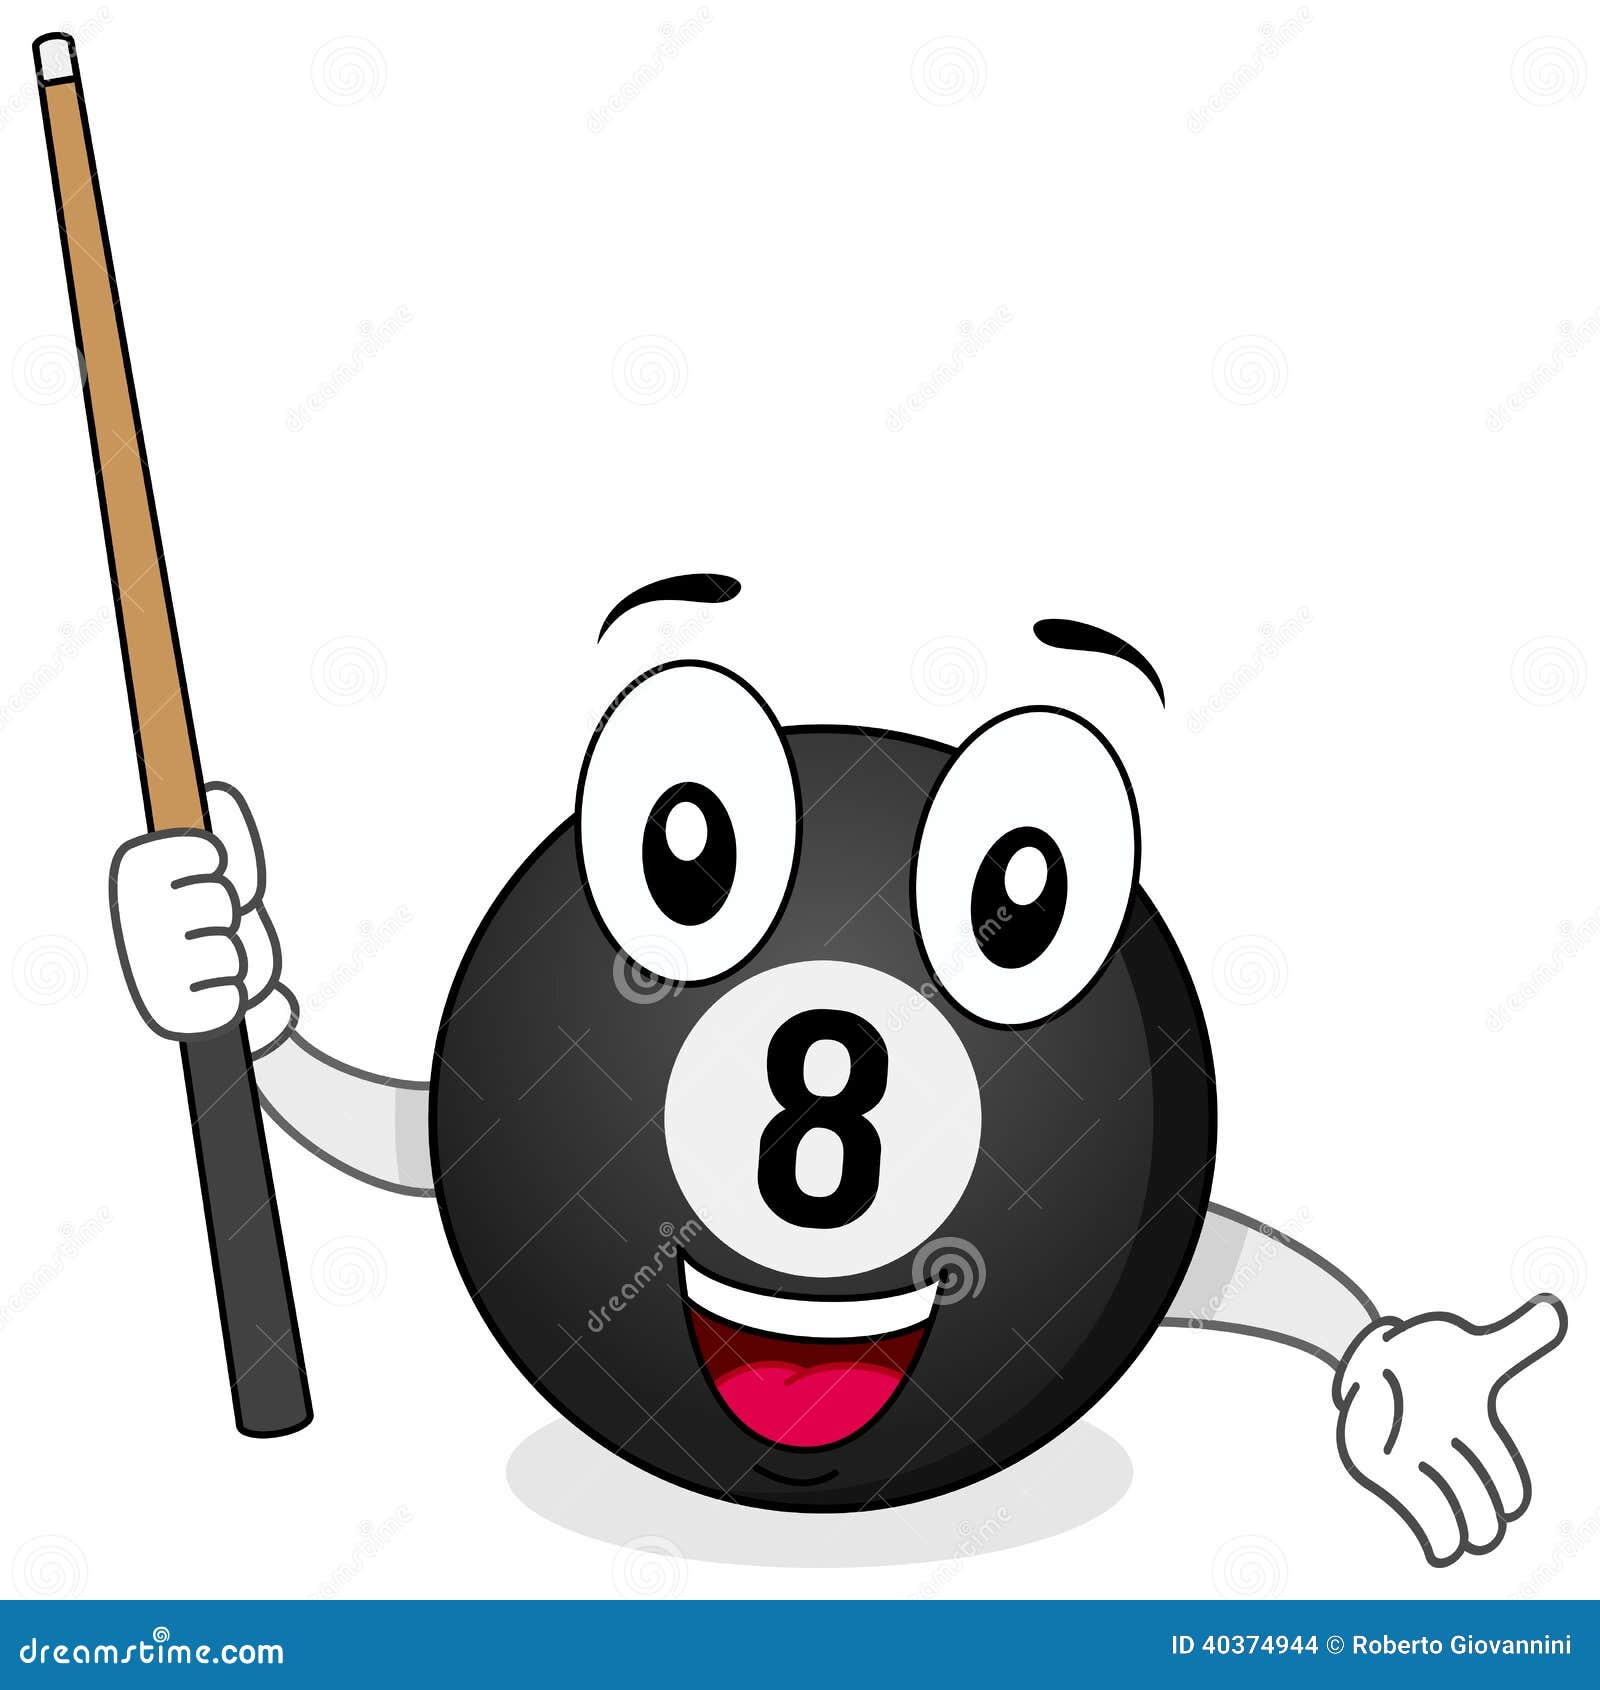 eight billiard ball character with cue